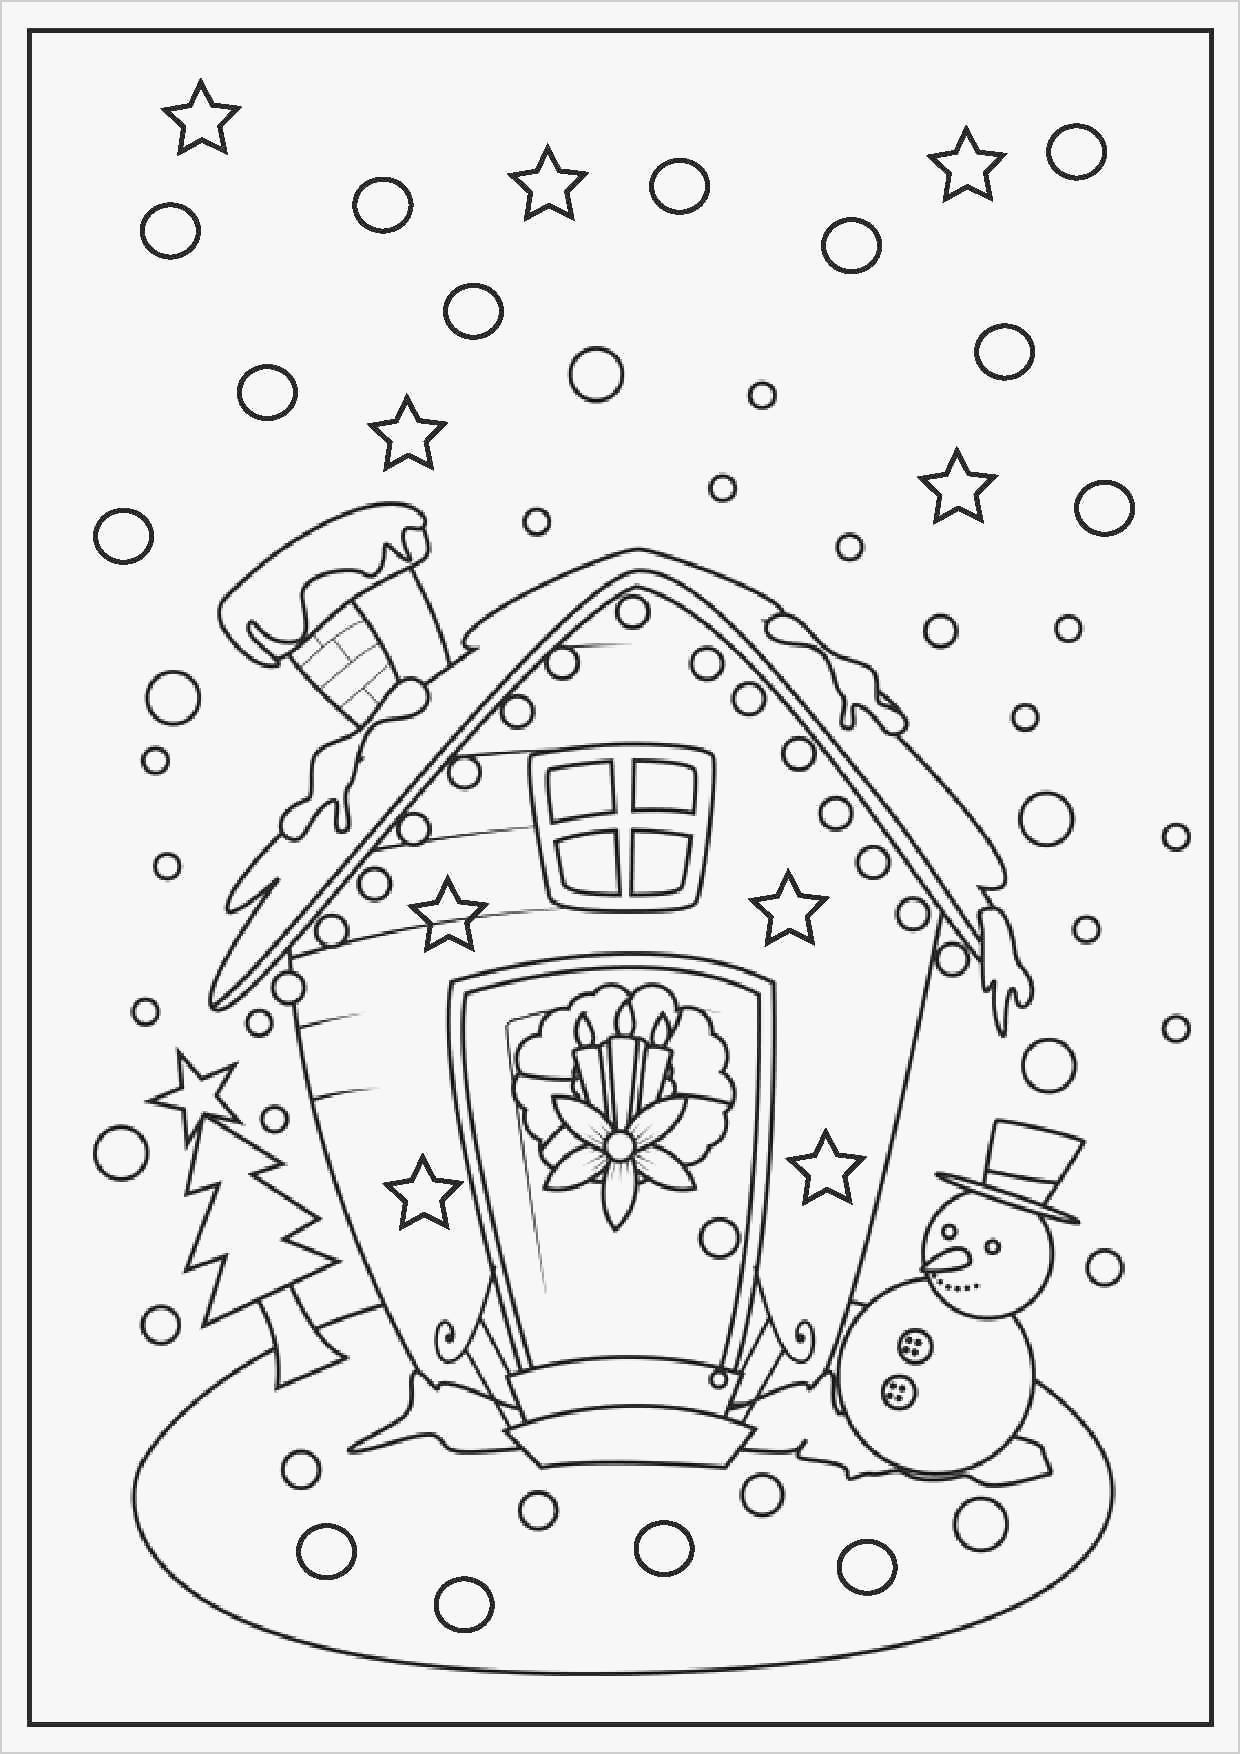 Flag Of Honduras Coloring Page 25 Coloring Pages Flags From Around The World Collection Coloring